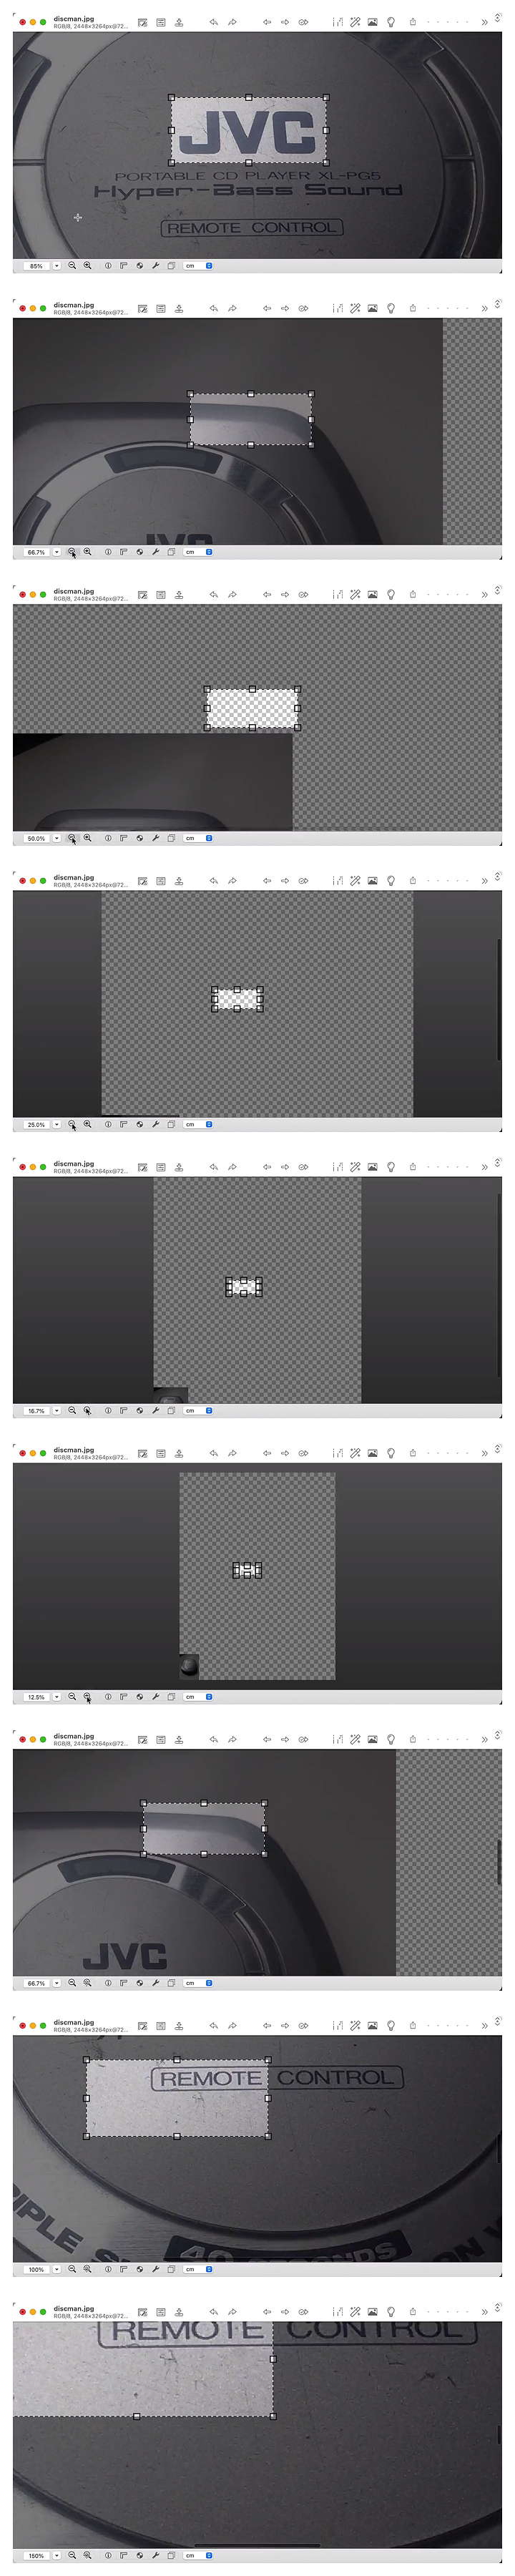 Selection gets offset when zooming in or out.jpg